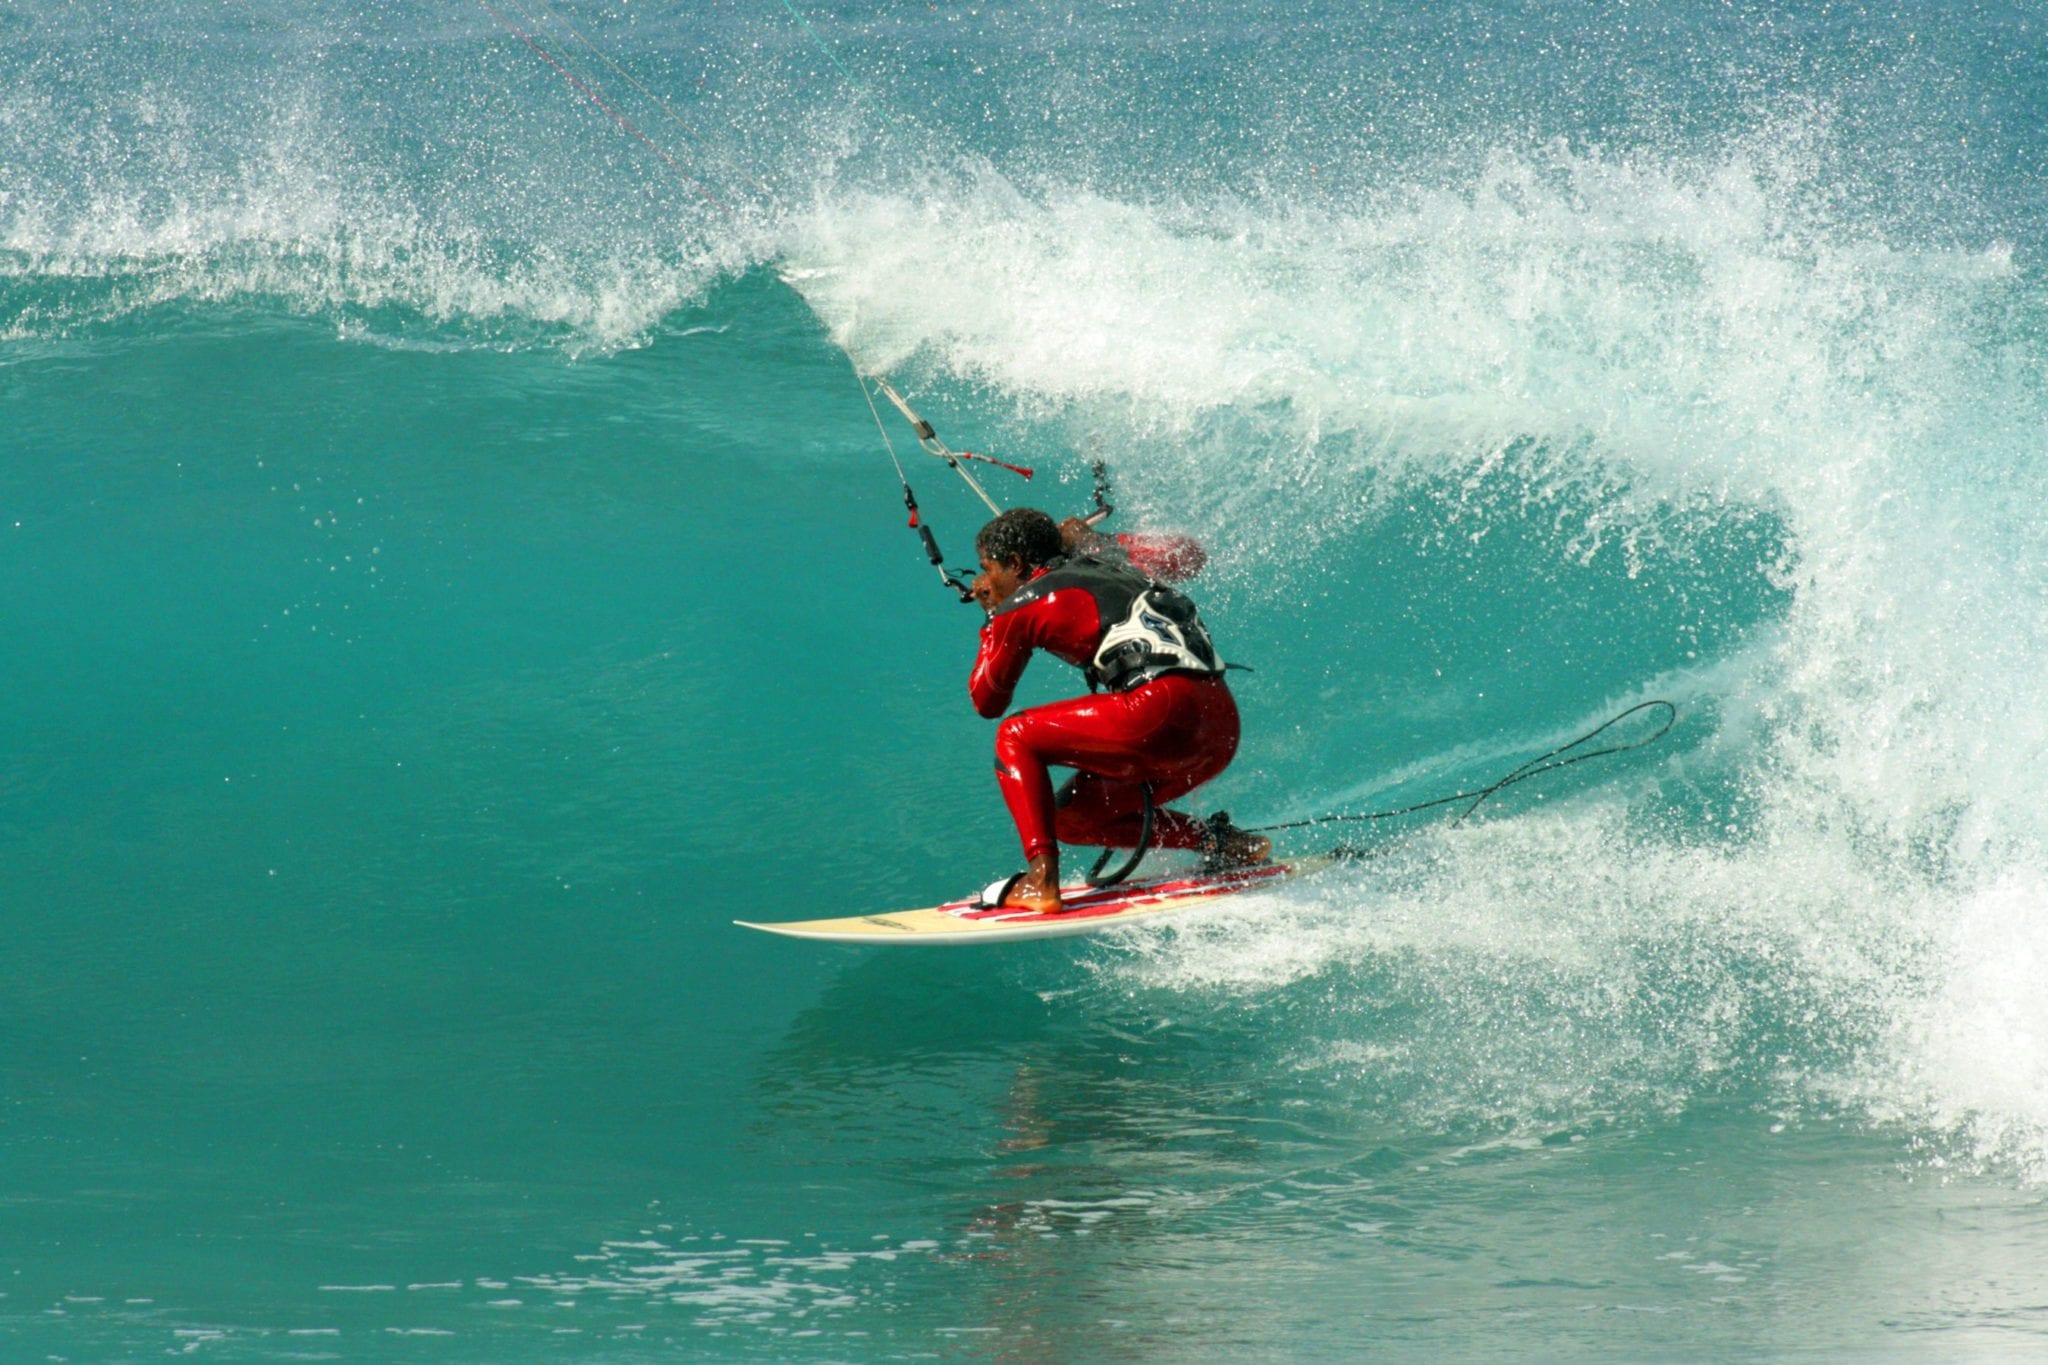 Mitu’s early years on the F-ONE team, dropping in on Sal, Cabo Verde. Photo Courtesy F-One